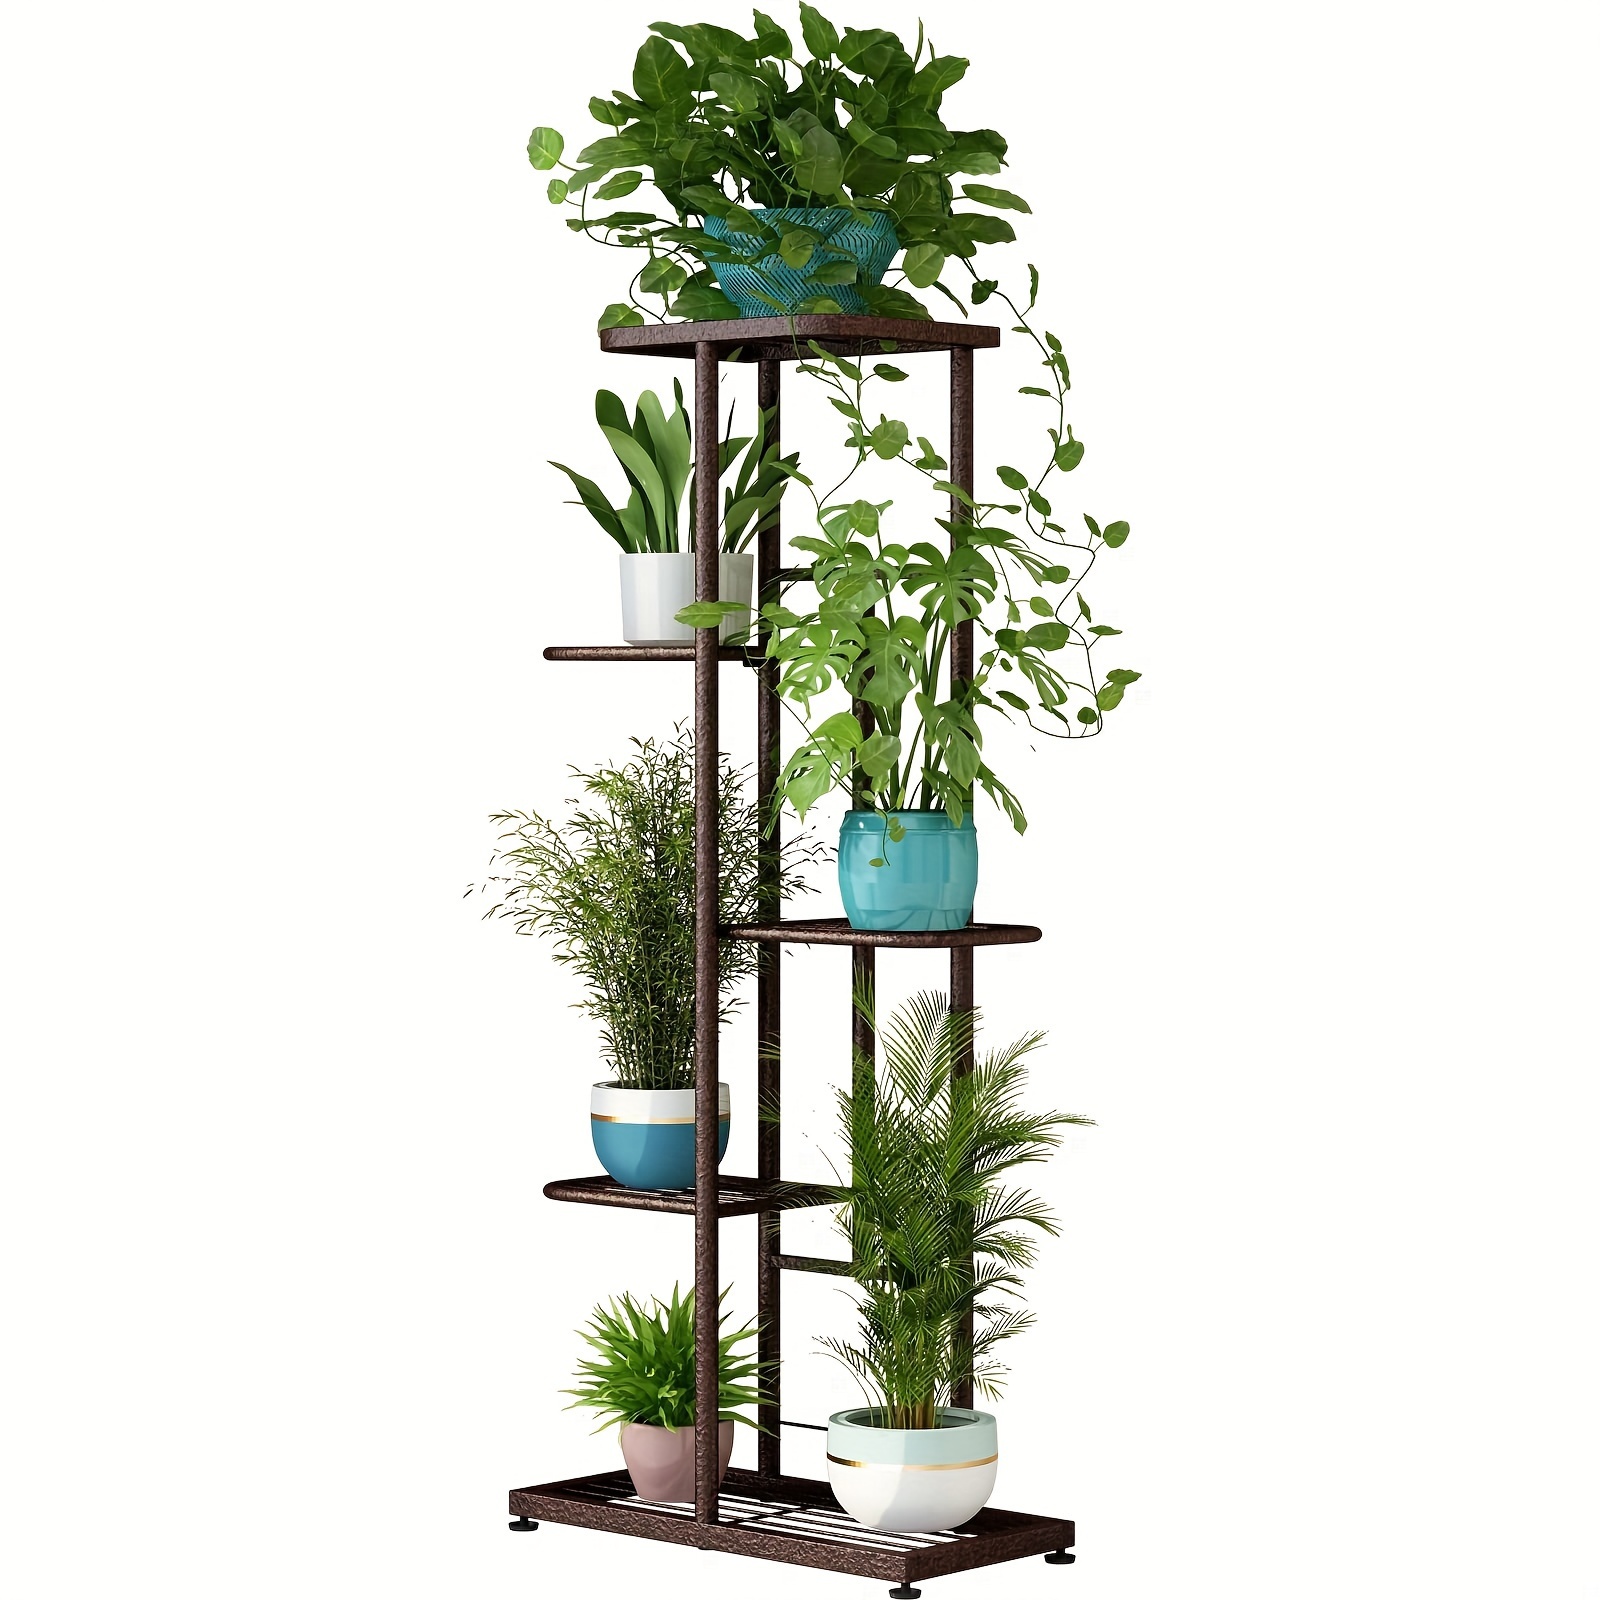 

1pc, 5 Tier 6 Potted Bronze Plant Stand Metal For Indoor Outdoor Potted Multiple Flower Pot Holder Shelf Planter Display Shelving Unit For Patio Garden Corner Balcony Living Room, Home Decor